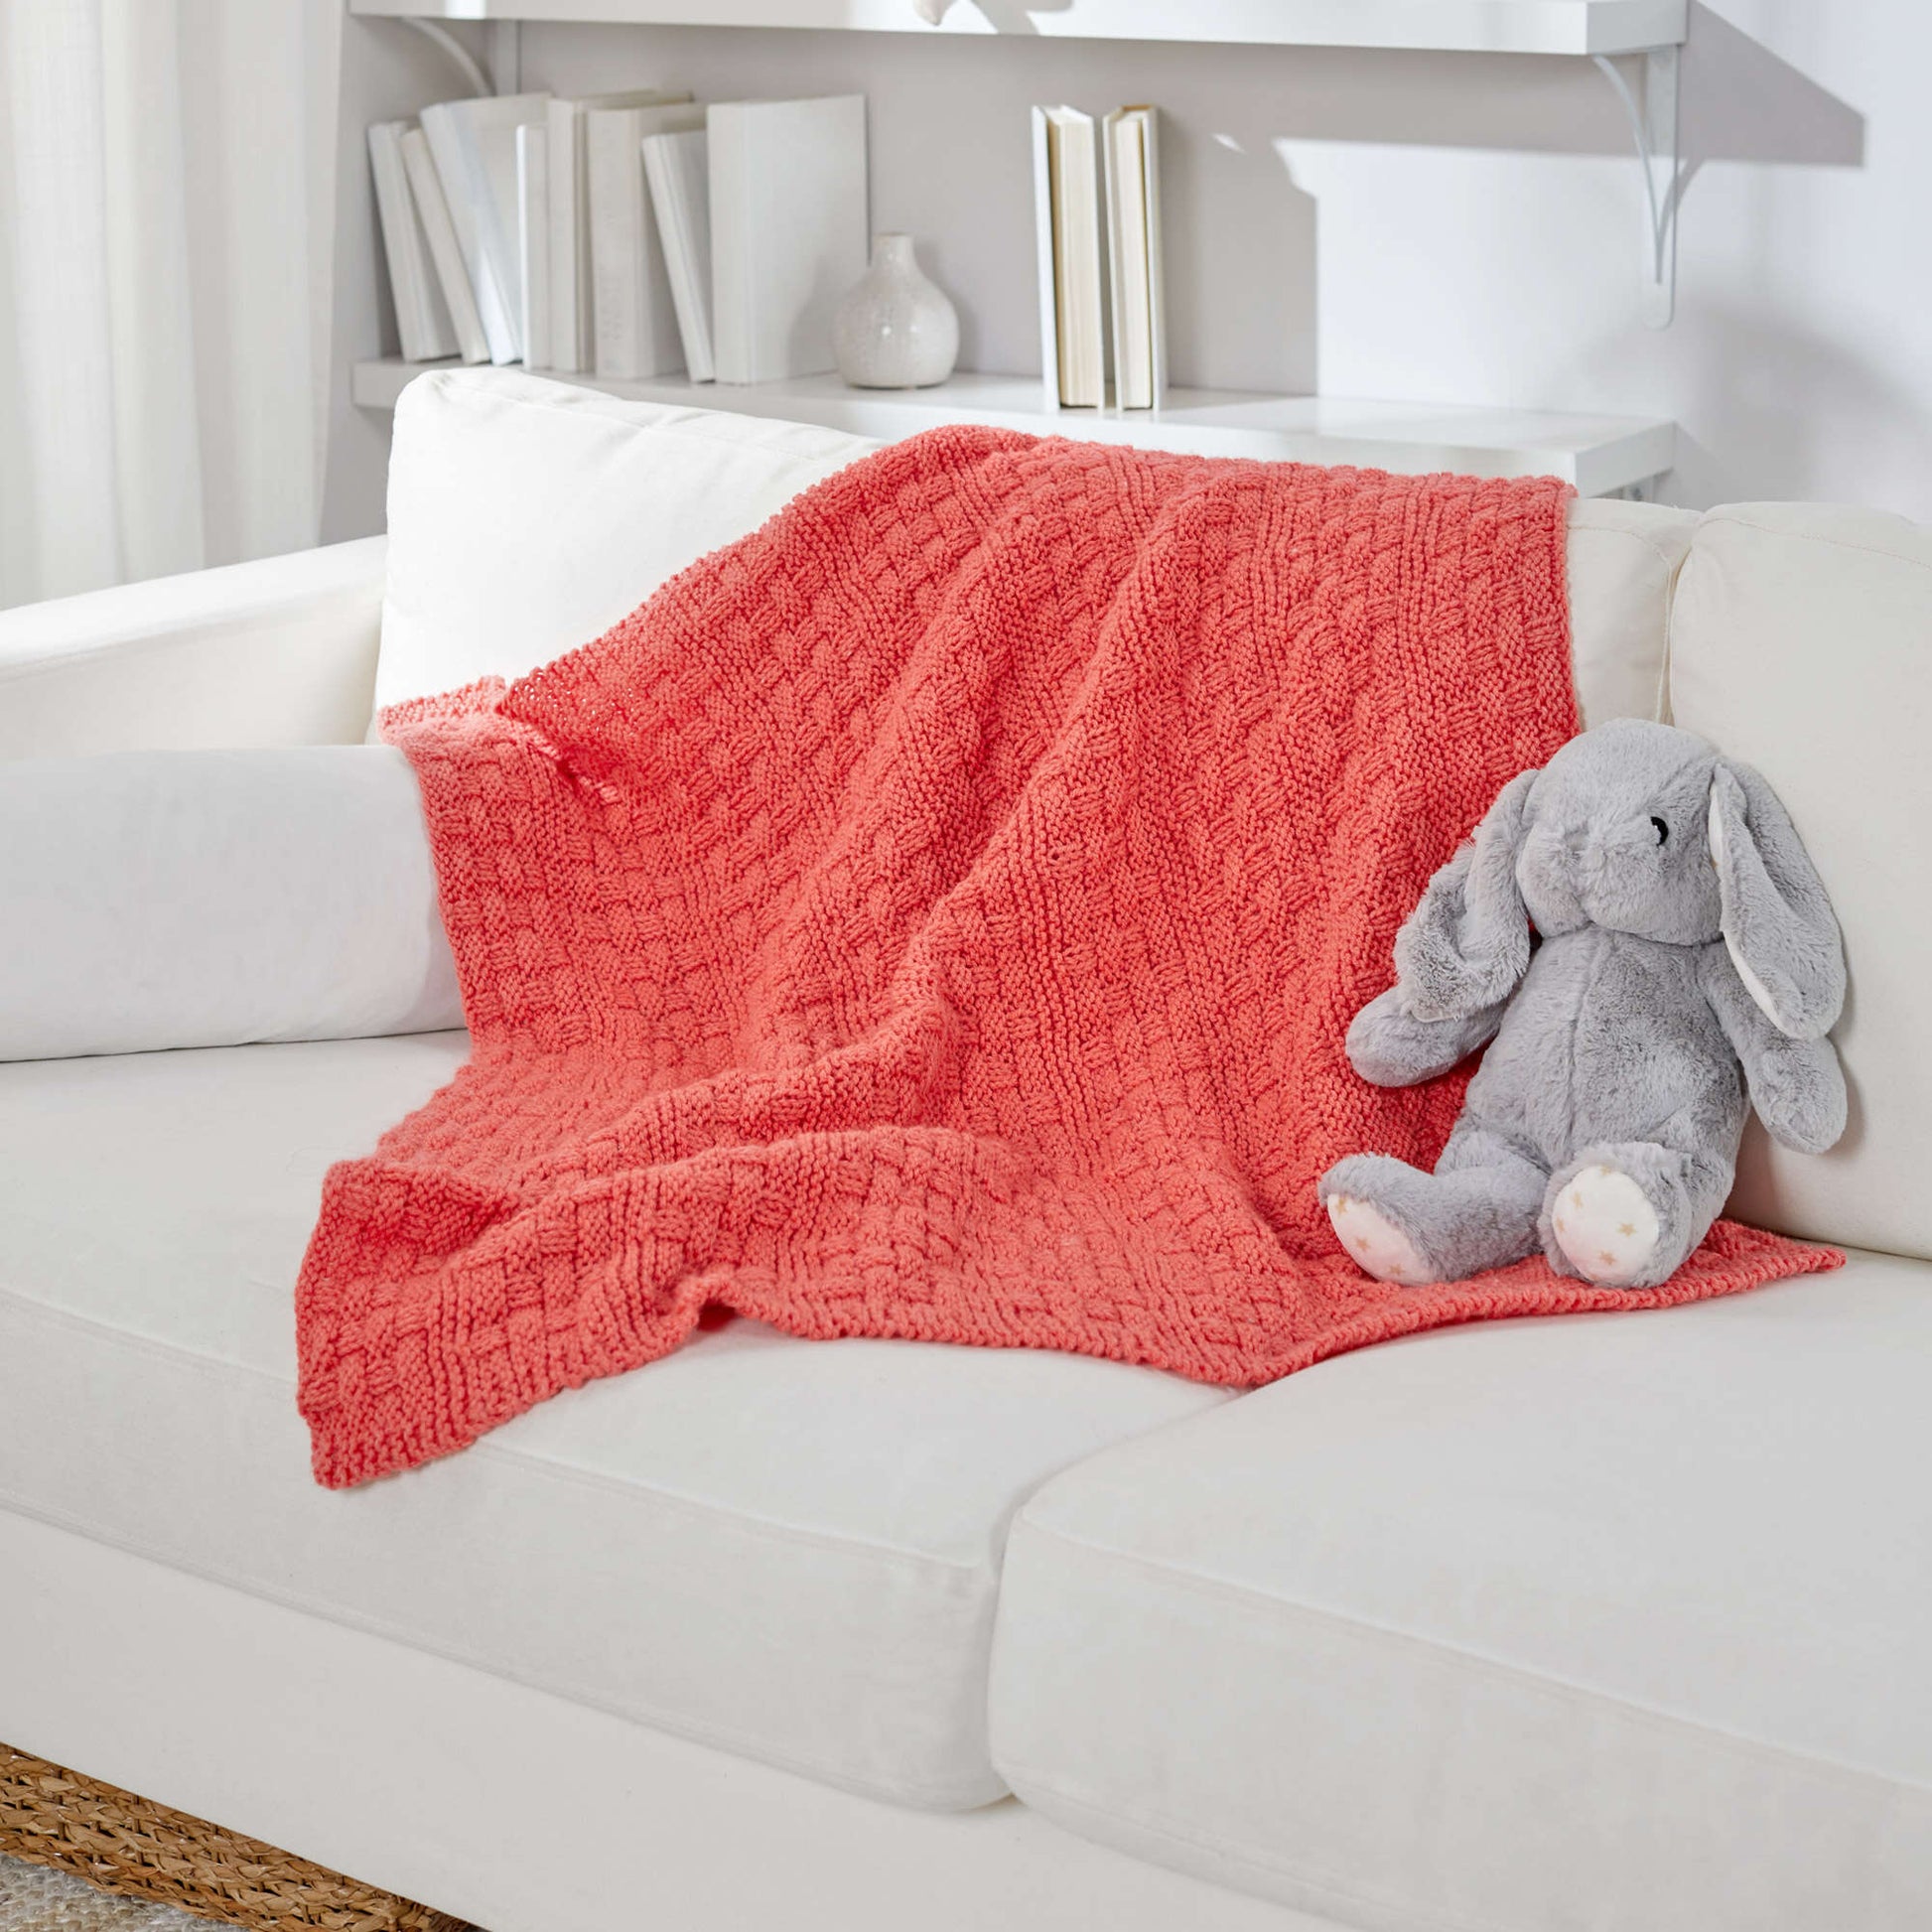 Free Red Heart Bright And Cuddly Basketweave Knit Blanket Pattern